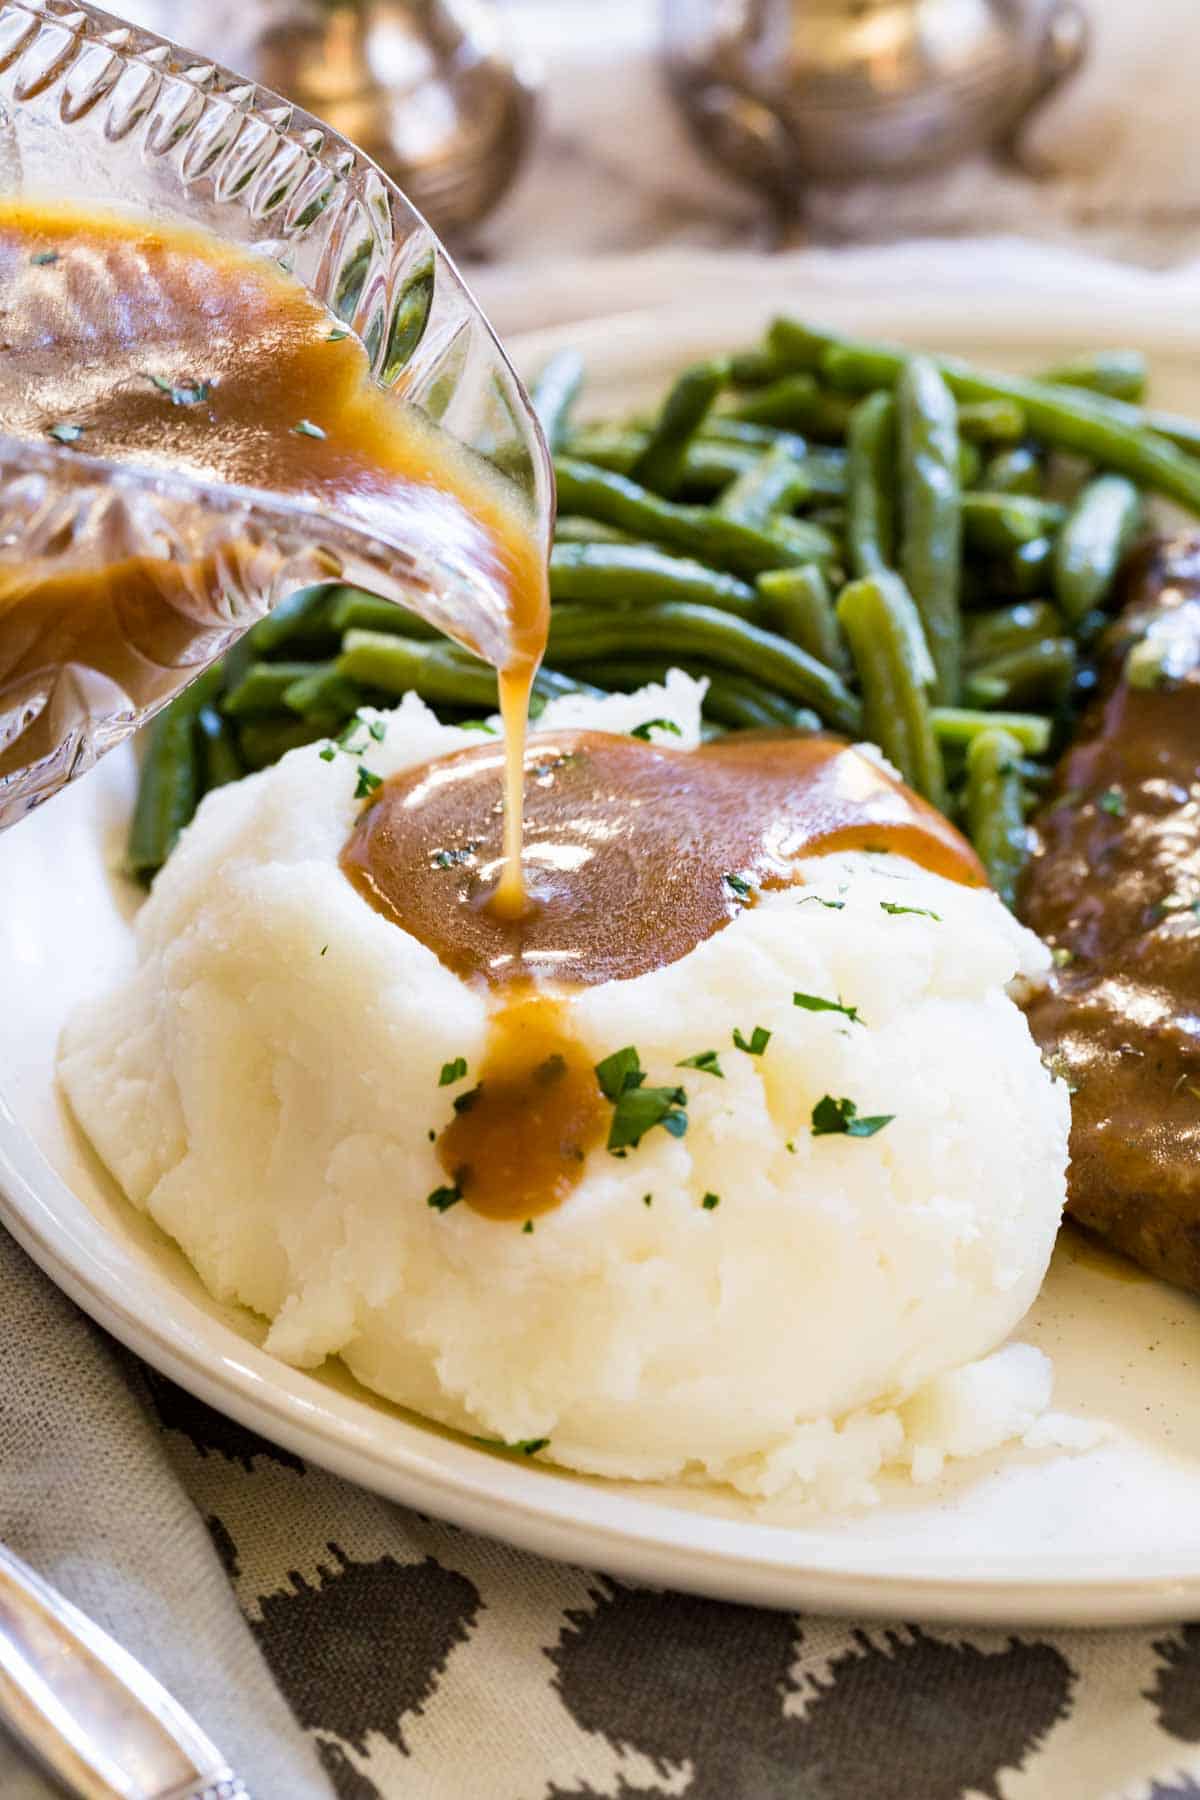 Gluten-free brown gravy is poured over a pile of mashed potatoes on a plate next to green beans.